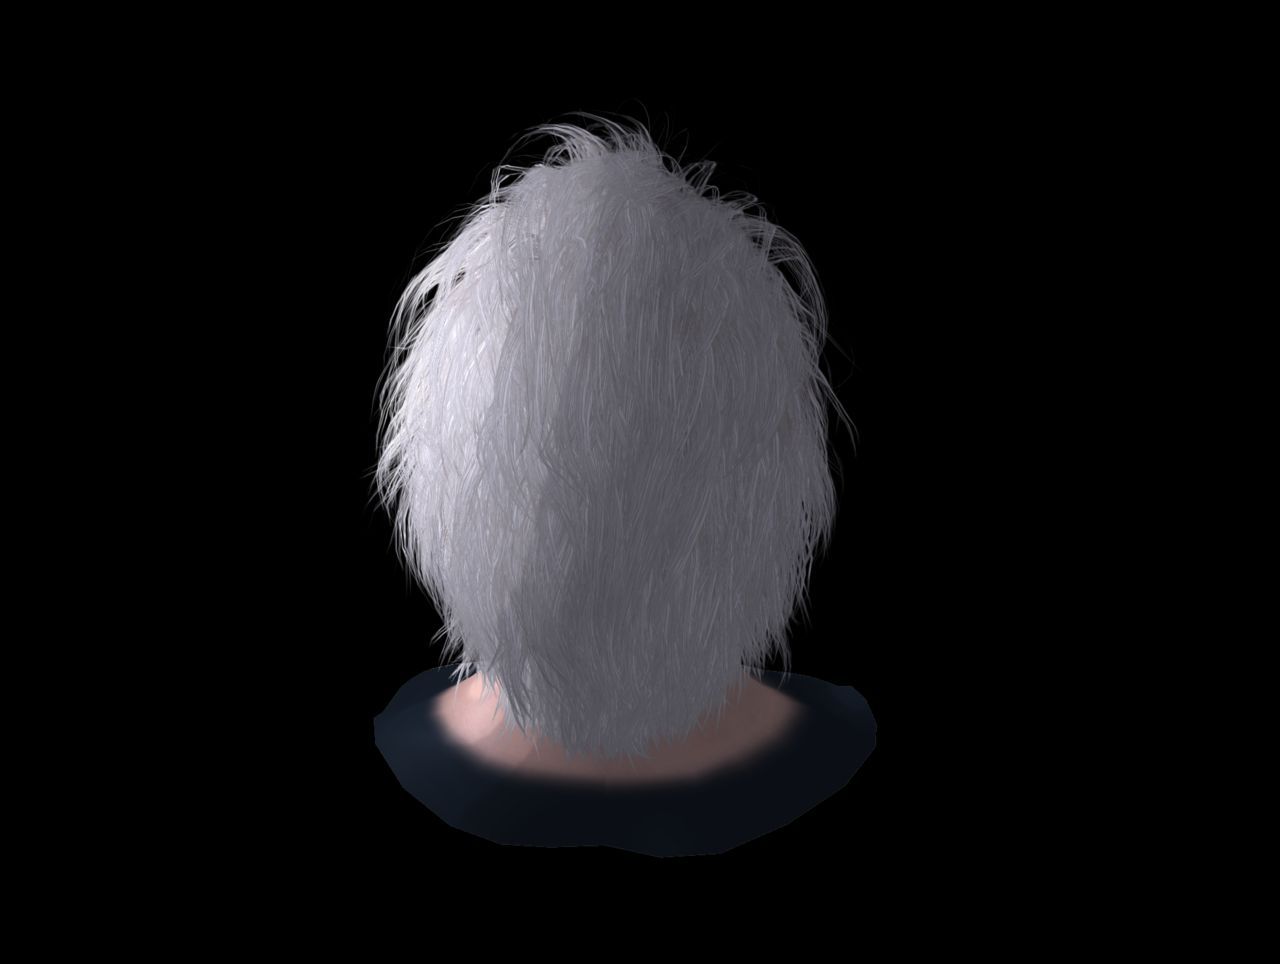 [J.A.] DMC5 | Vergil Head Reference PNG 42